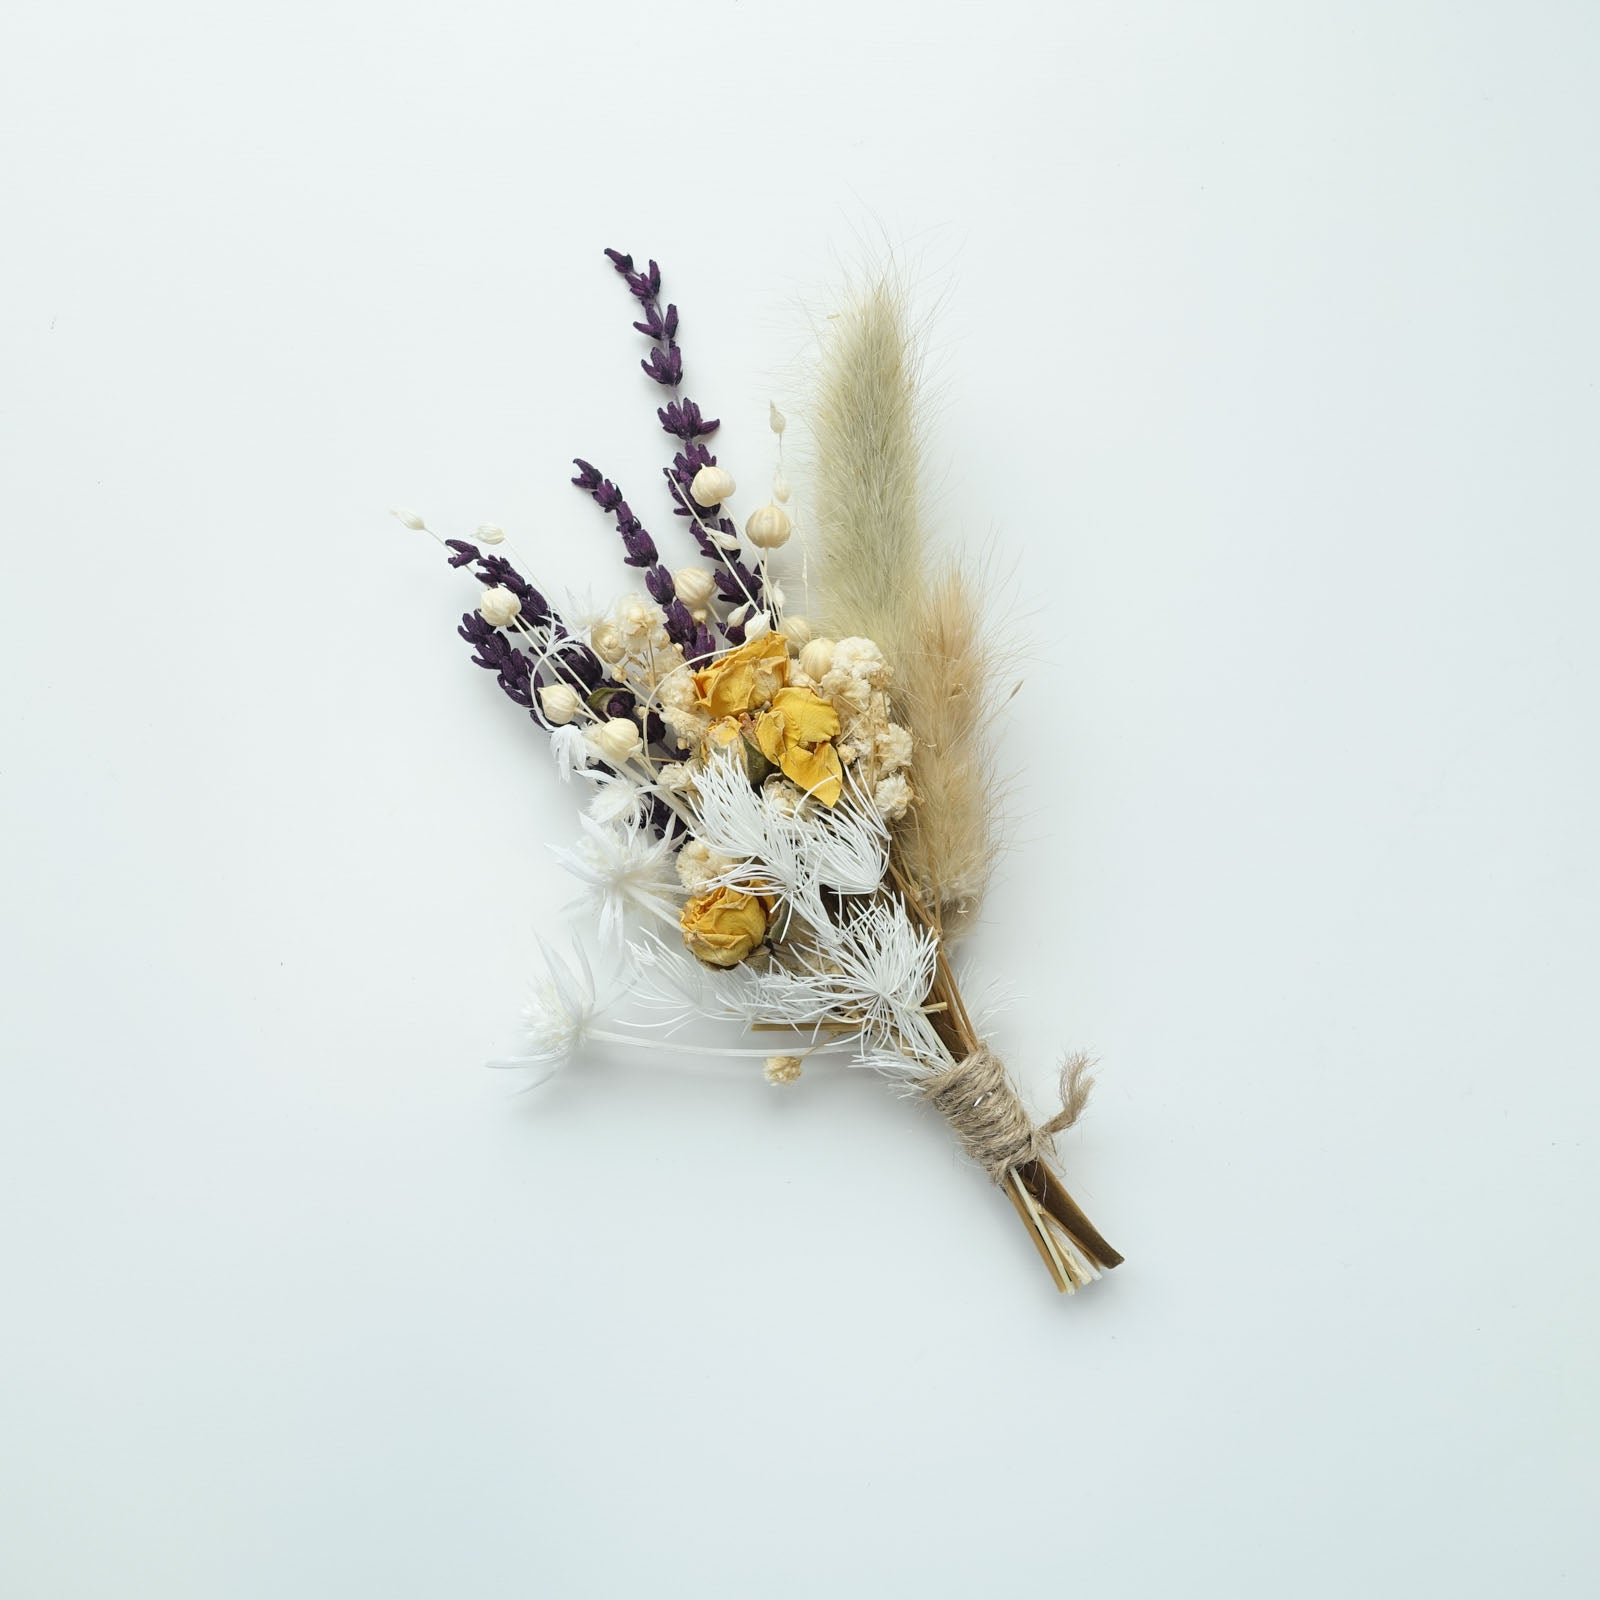 rustic natural vintage dried flower posy boutonniere wedding wax seal fiona ariva australia baby's breath lavender